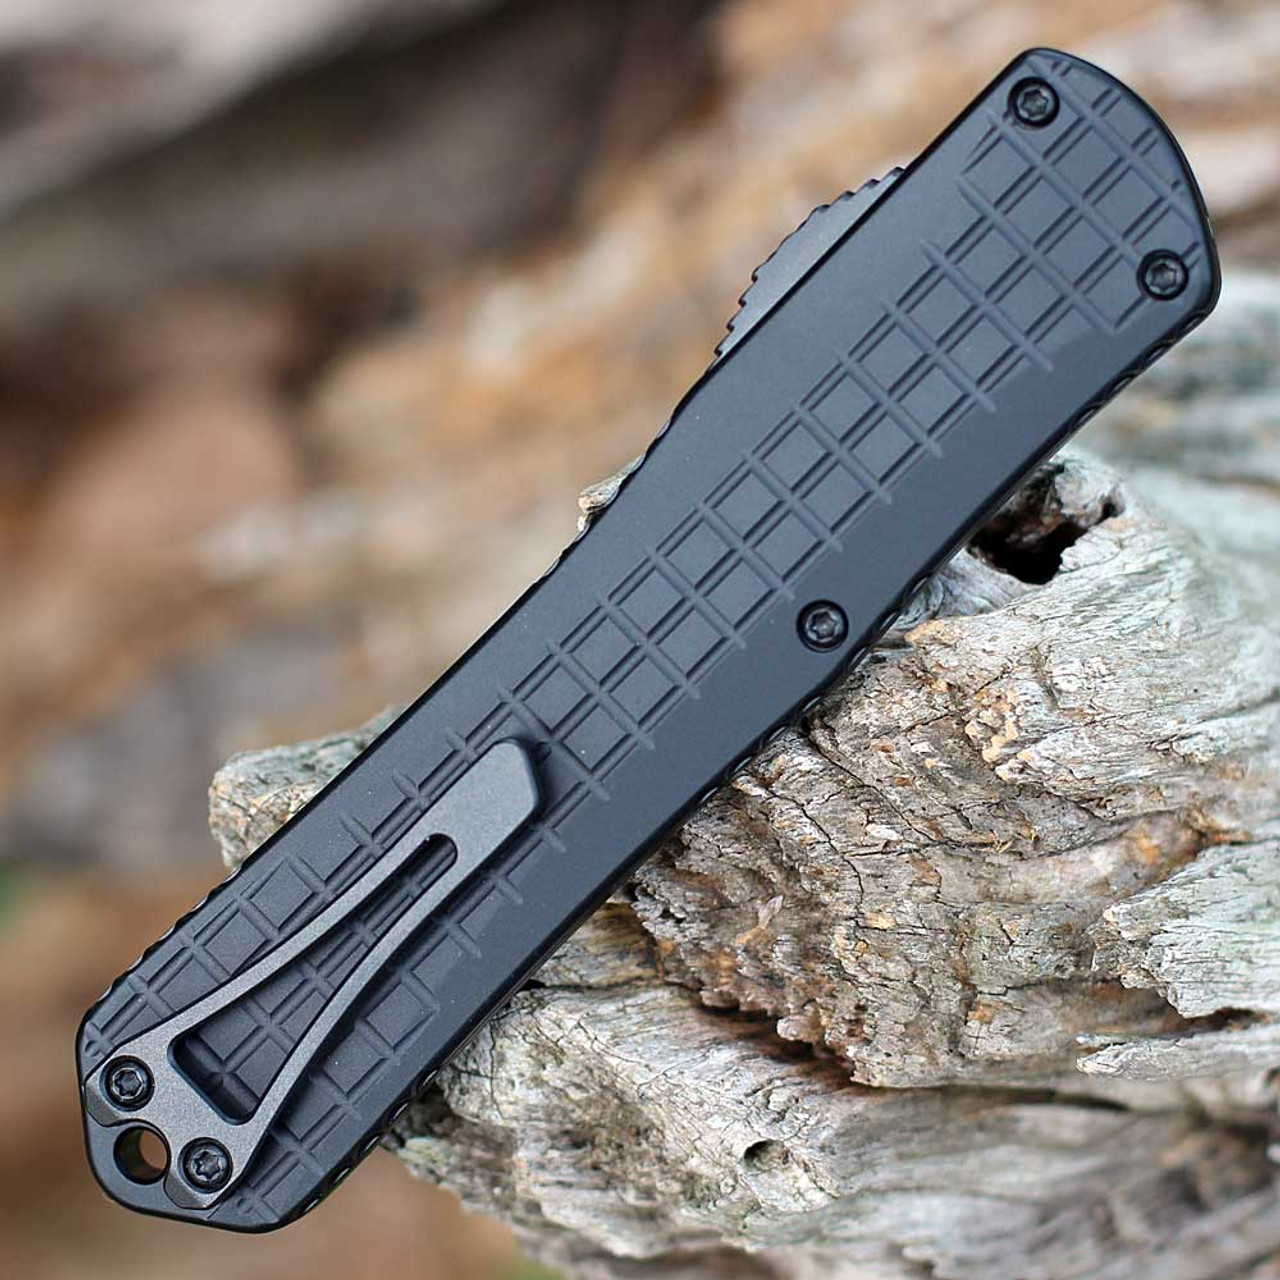 Heretic Manticore X OTF Frag Chassis Automatic (H032F-10A-T) - 3.7" 2Tone CPM-MagnaCut Double Edge Plain Blade, Black Chassis Anodized Aluminum/Standard Hardware, Ambi Clip